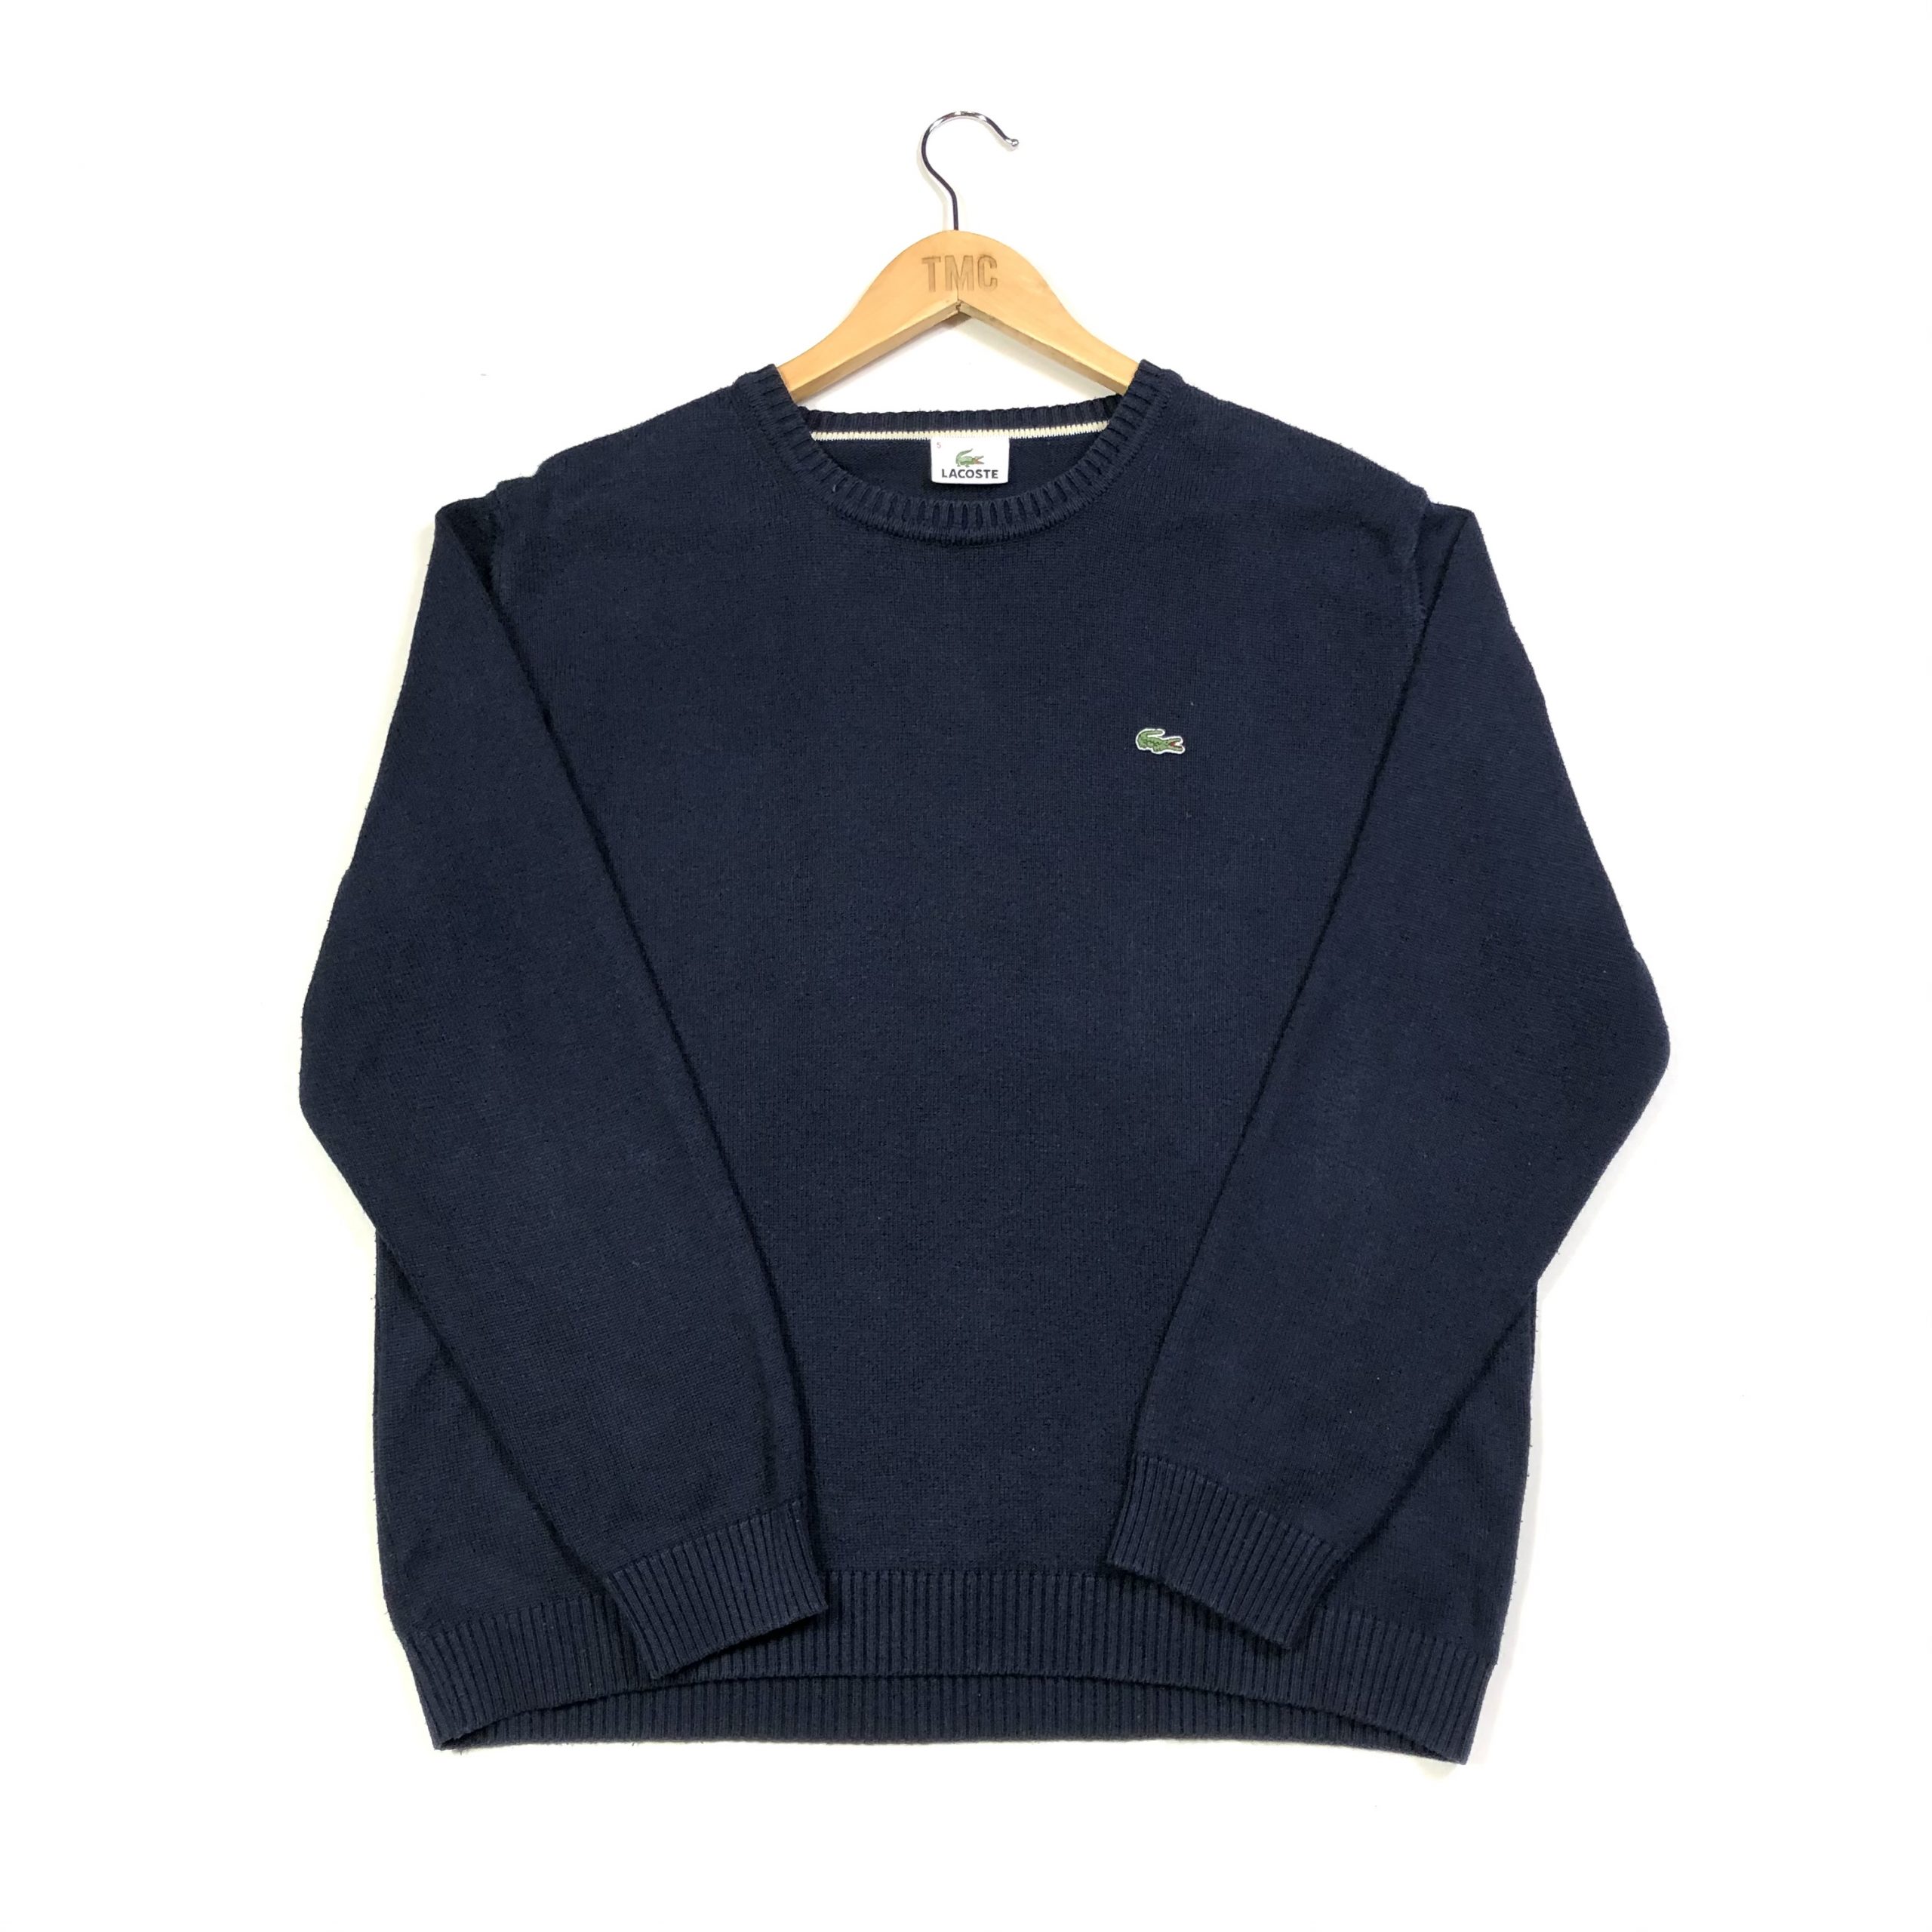 Lacoste Embroidered Essential Knit Jumper - Navy - S - TMC Vintage ...